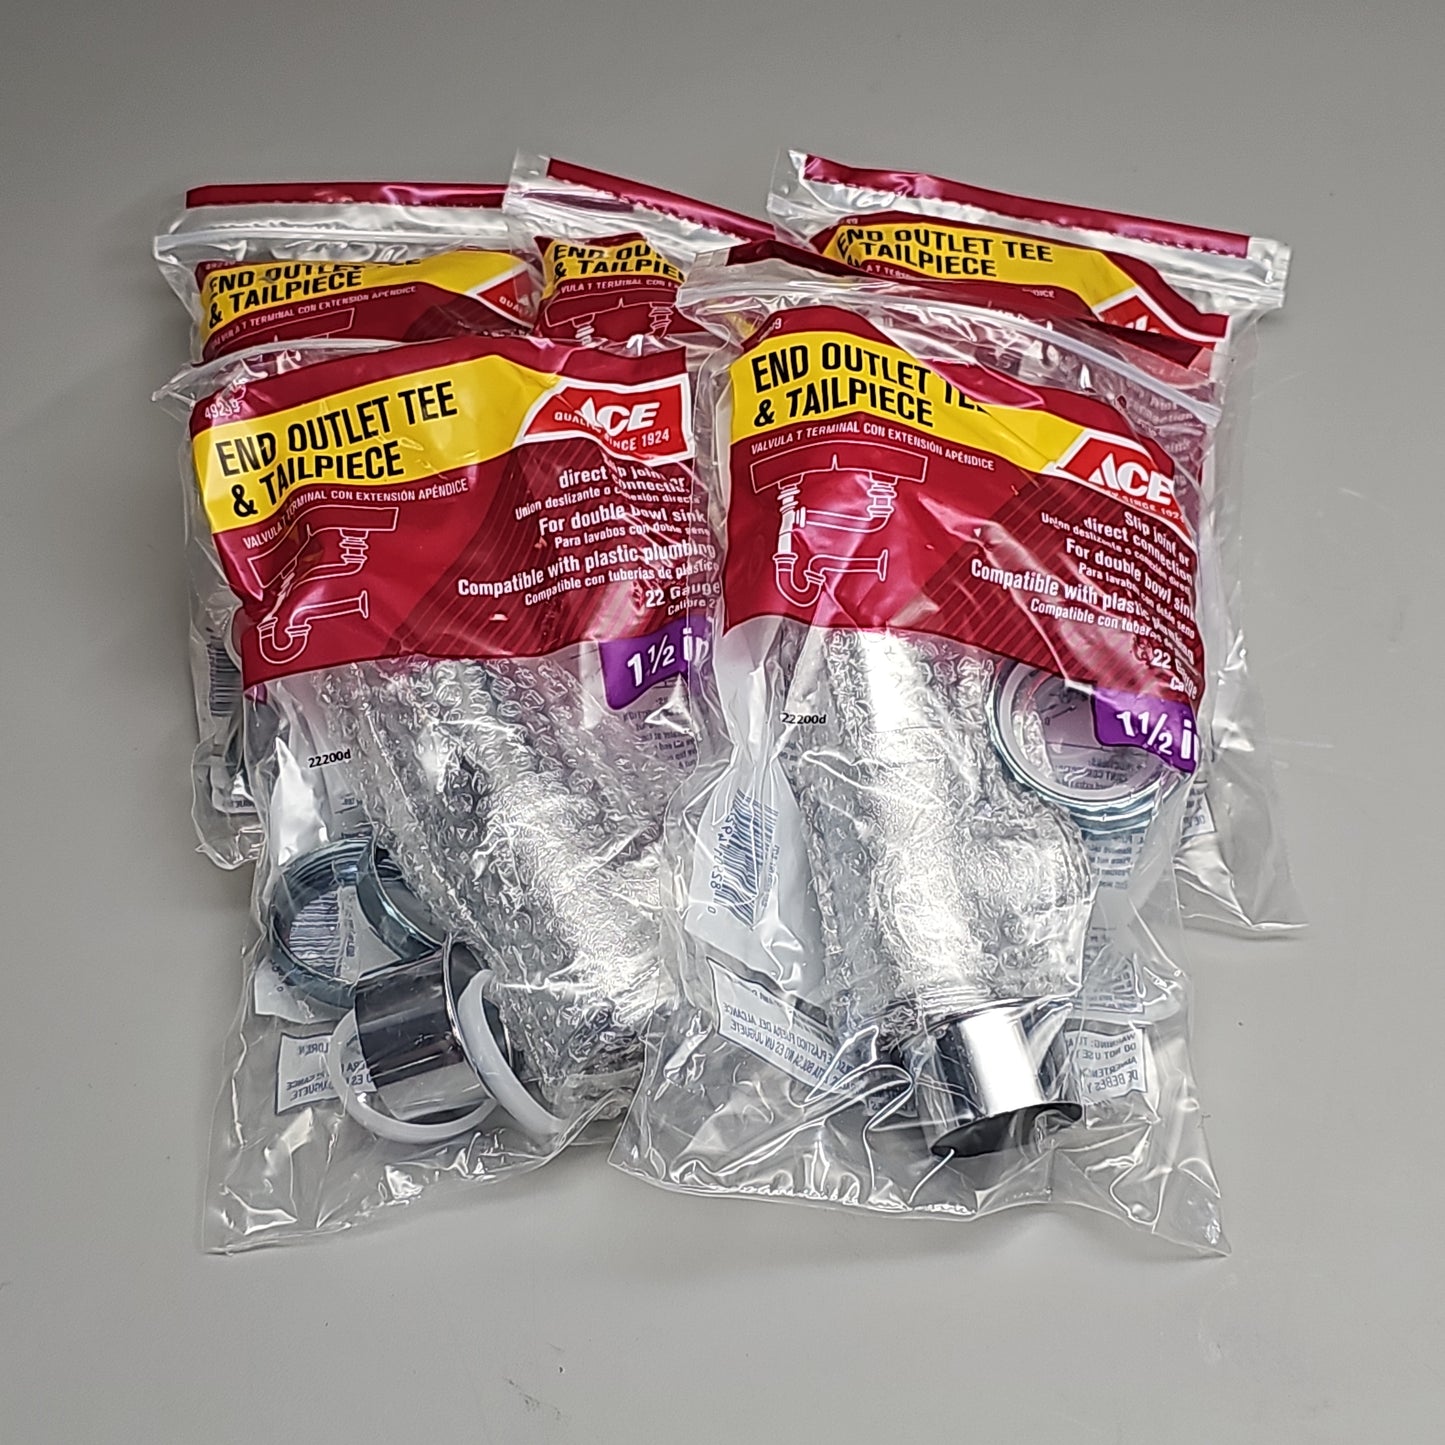 ACE End Outlet Tee & Tailpiece 5-PK 1.5" AH20217 49249 (New)